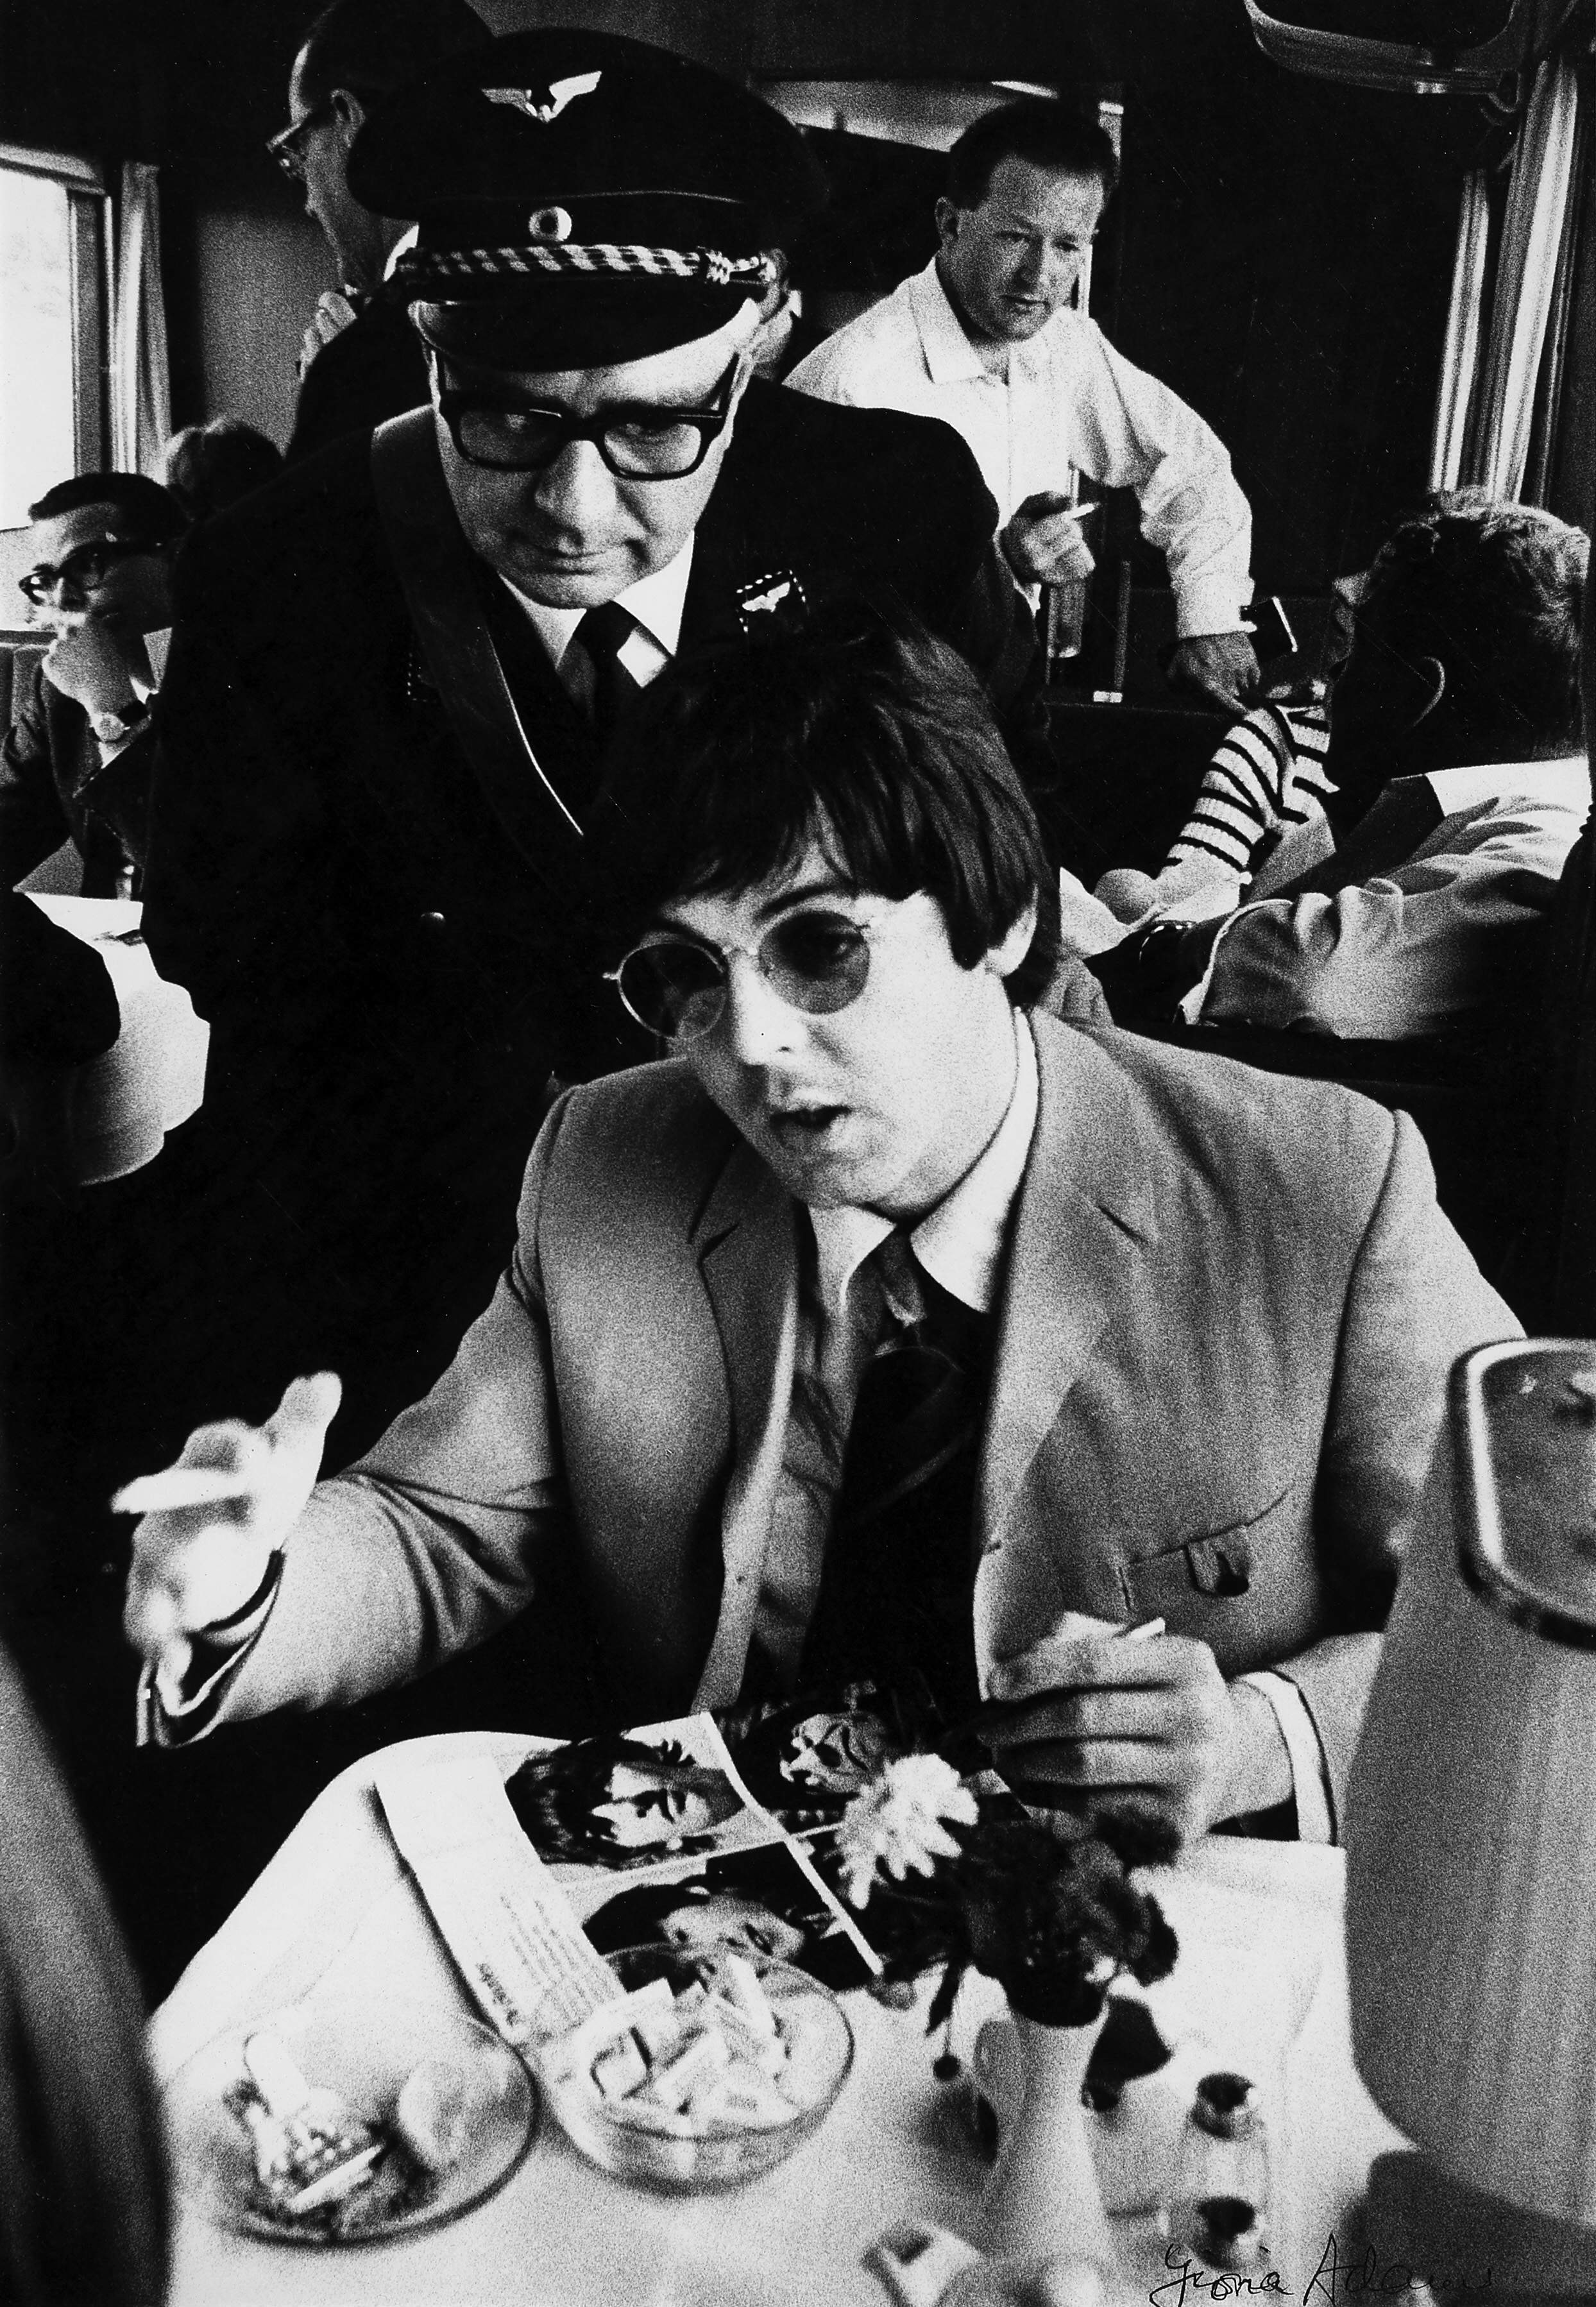 Paul McCartney and (Tony Barrow in background), on the Germany tour on a train between Munich and Hamburg in June 1966. | Source: Getty Images